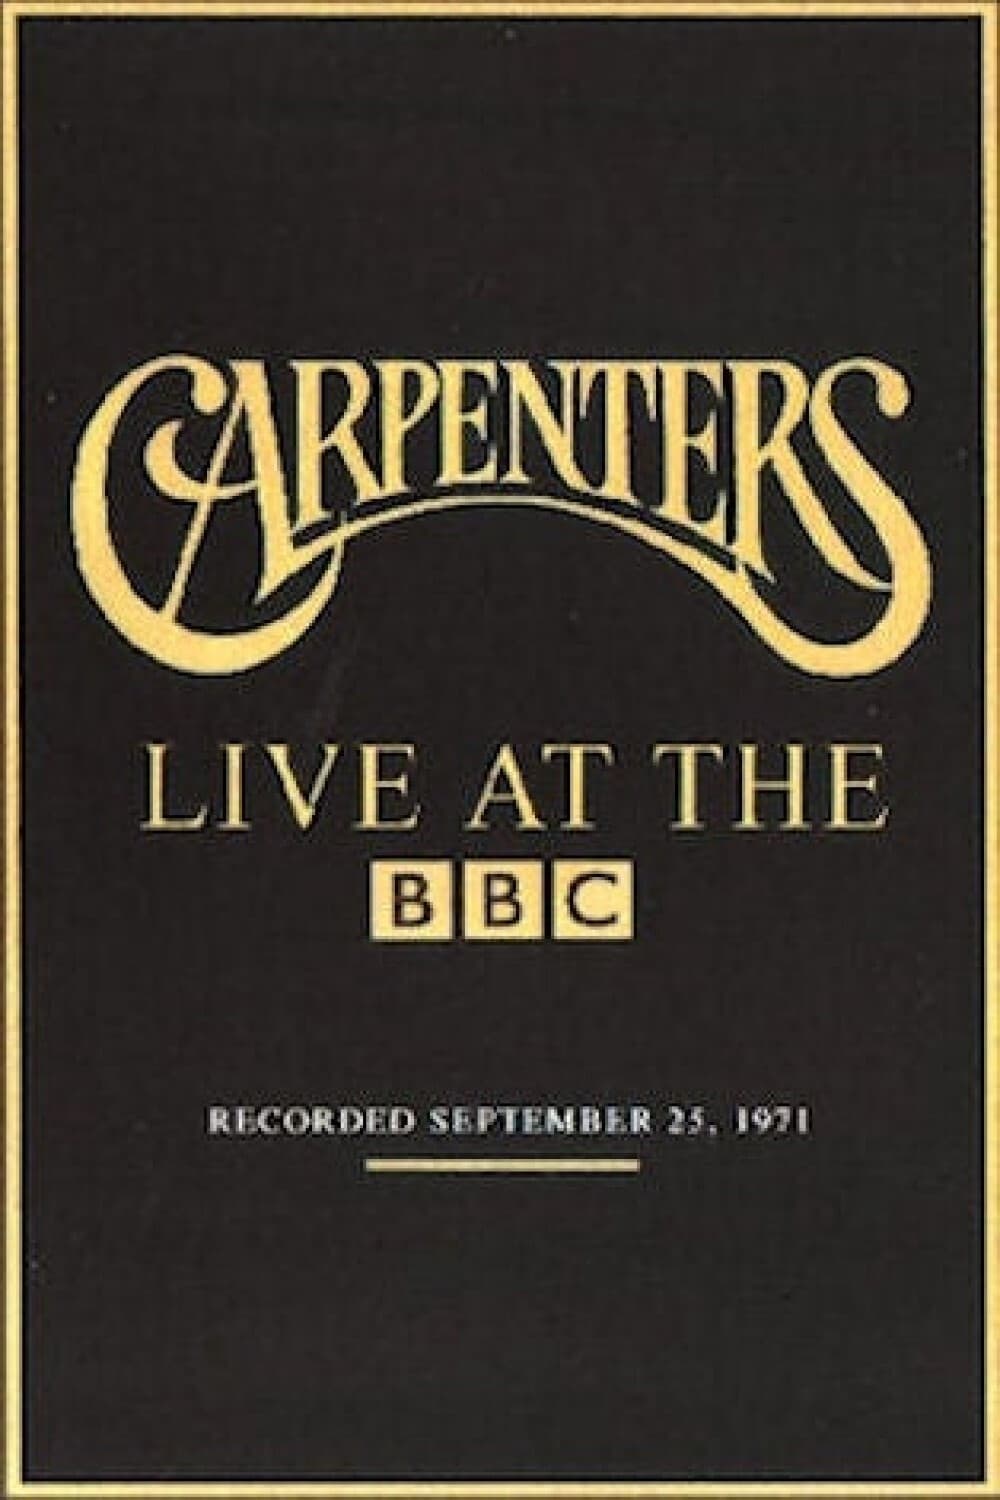 The Carpenters: Live at the BBC